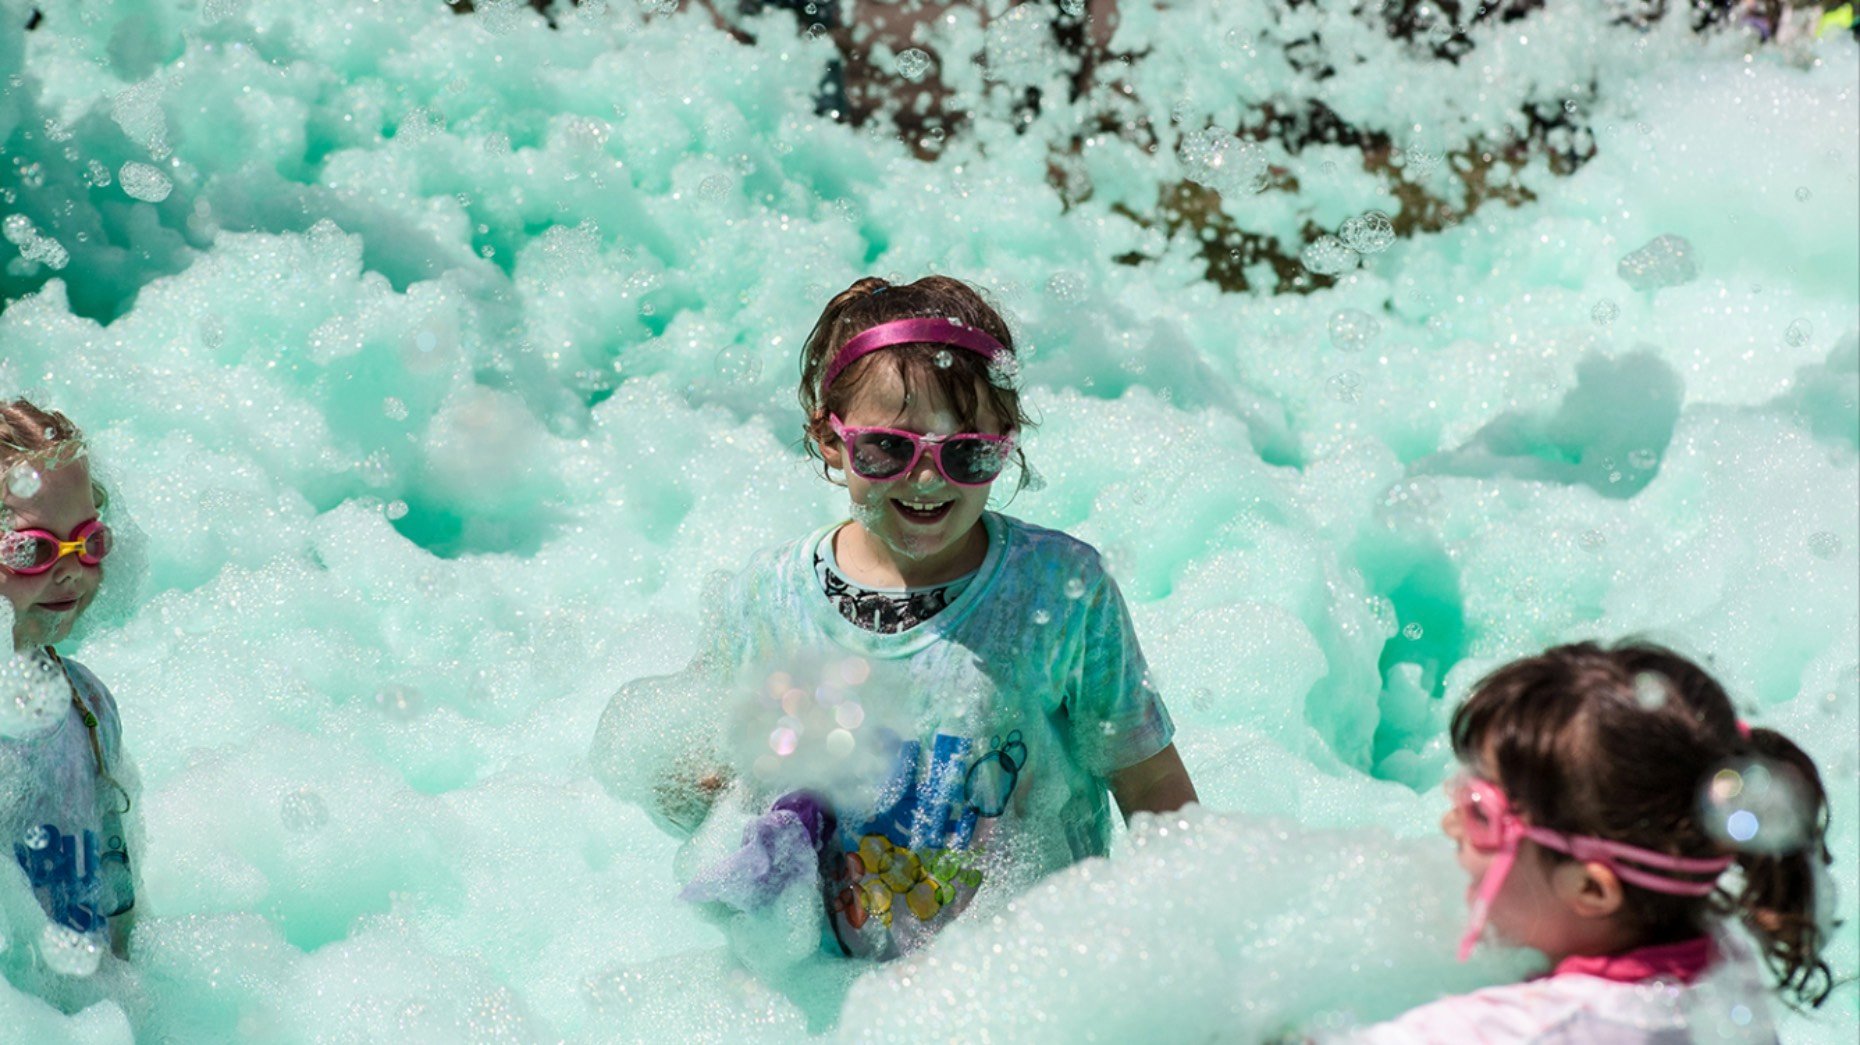 Lincolnshire's first Bubble Rush will take place at Boultham Park on Sunday, September 11.